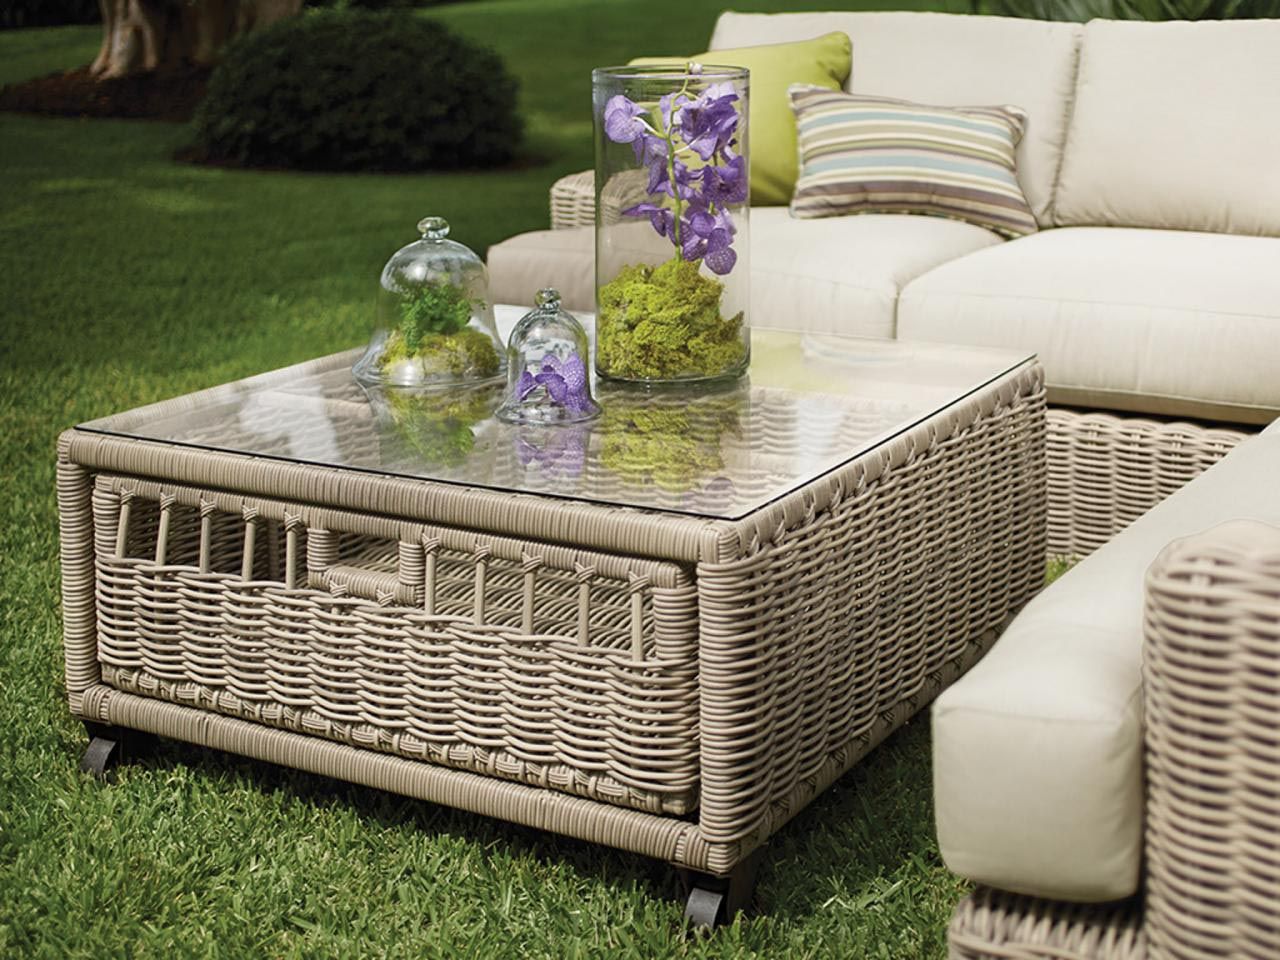 Patio Coffee Table With Storage | Coffee Table Design Ideas Intended For Outdoor Coffee Tables With Storage (View 11 of 20)